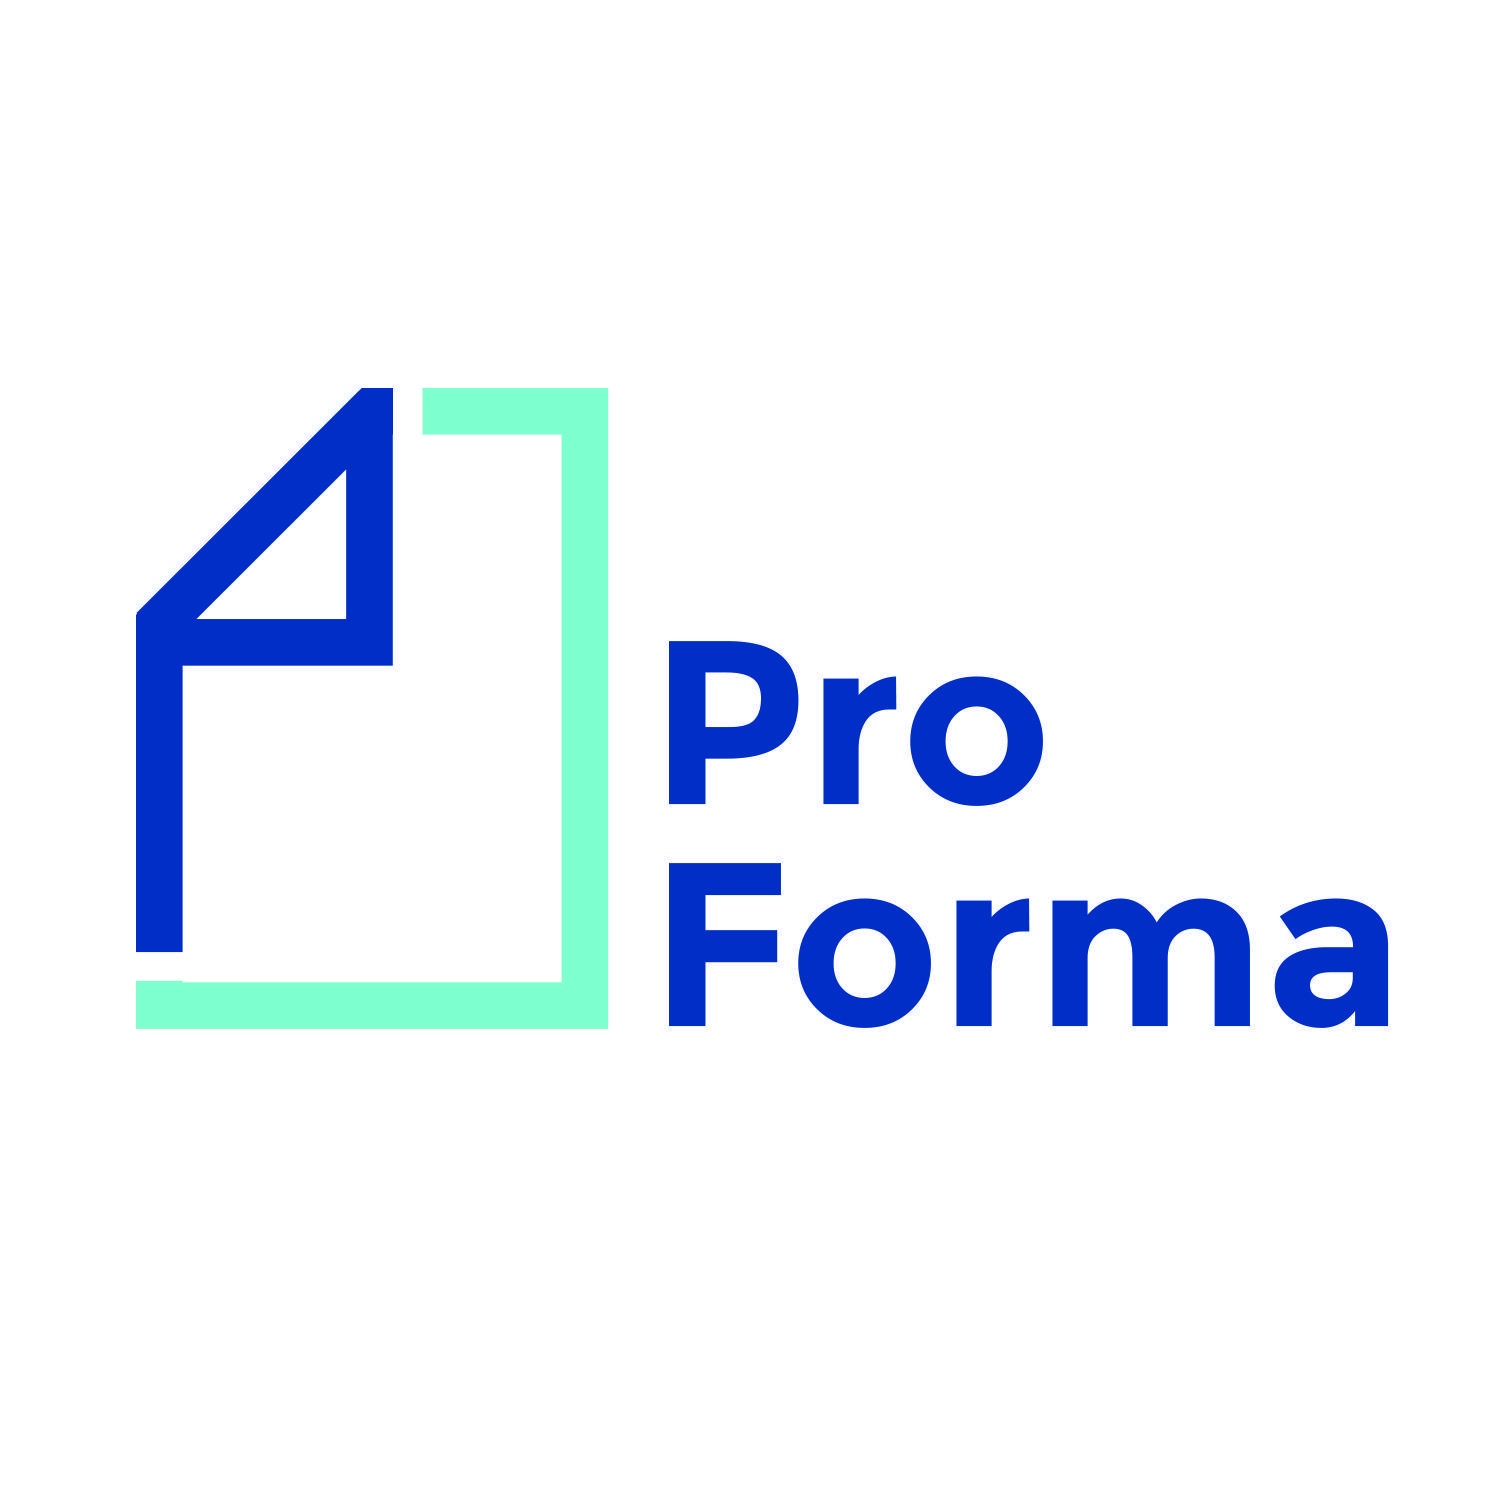 CEB Logo - Modern, Professional, Startup Logo Design for Pro Forma by ceb ...